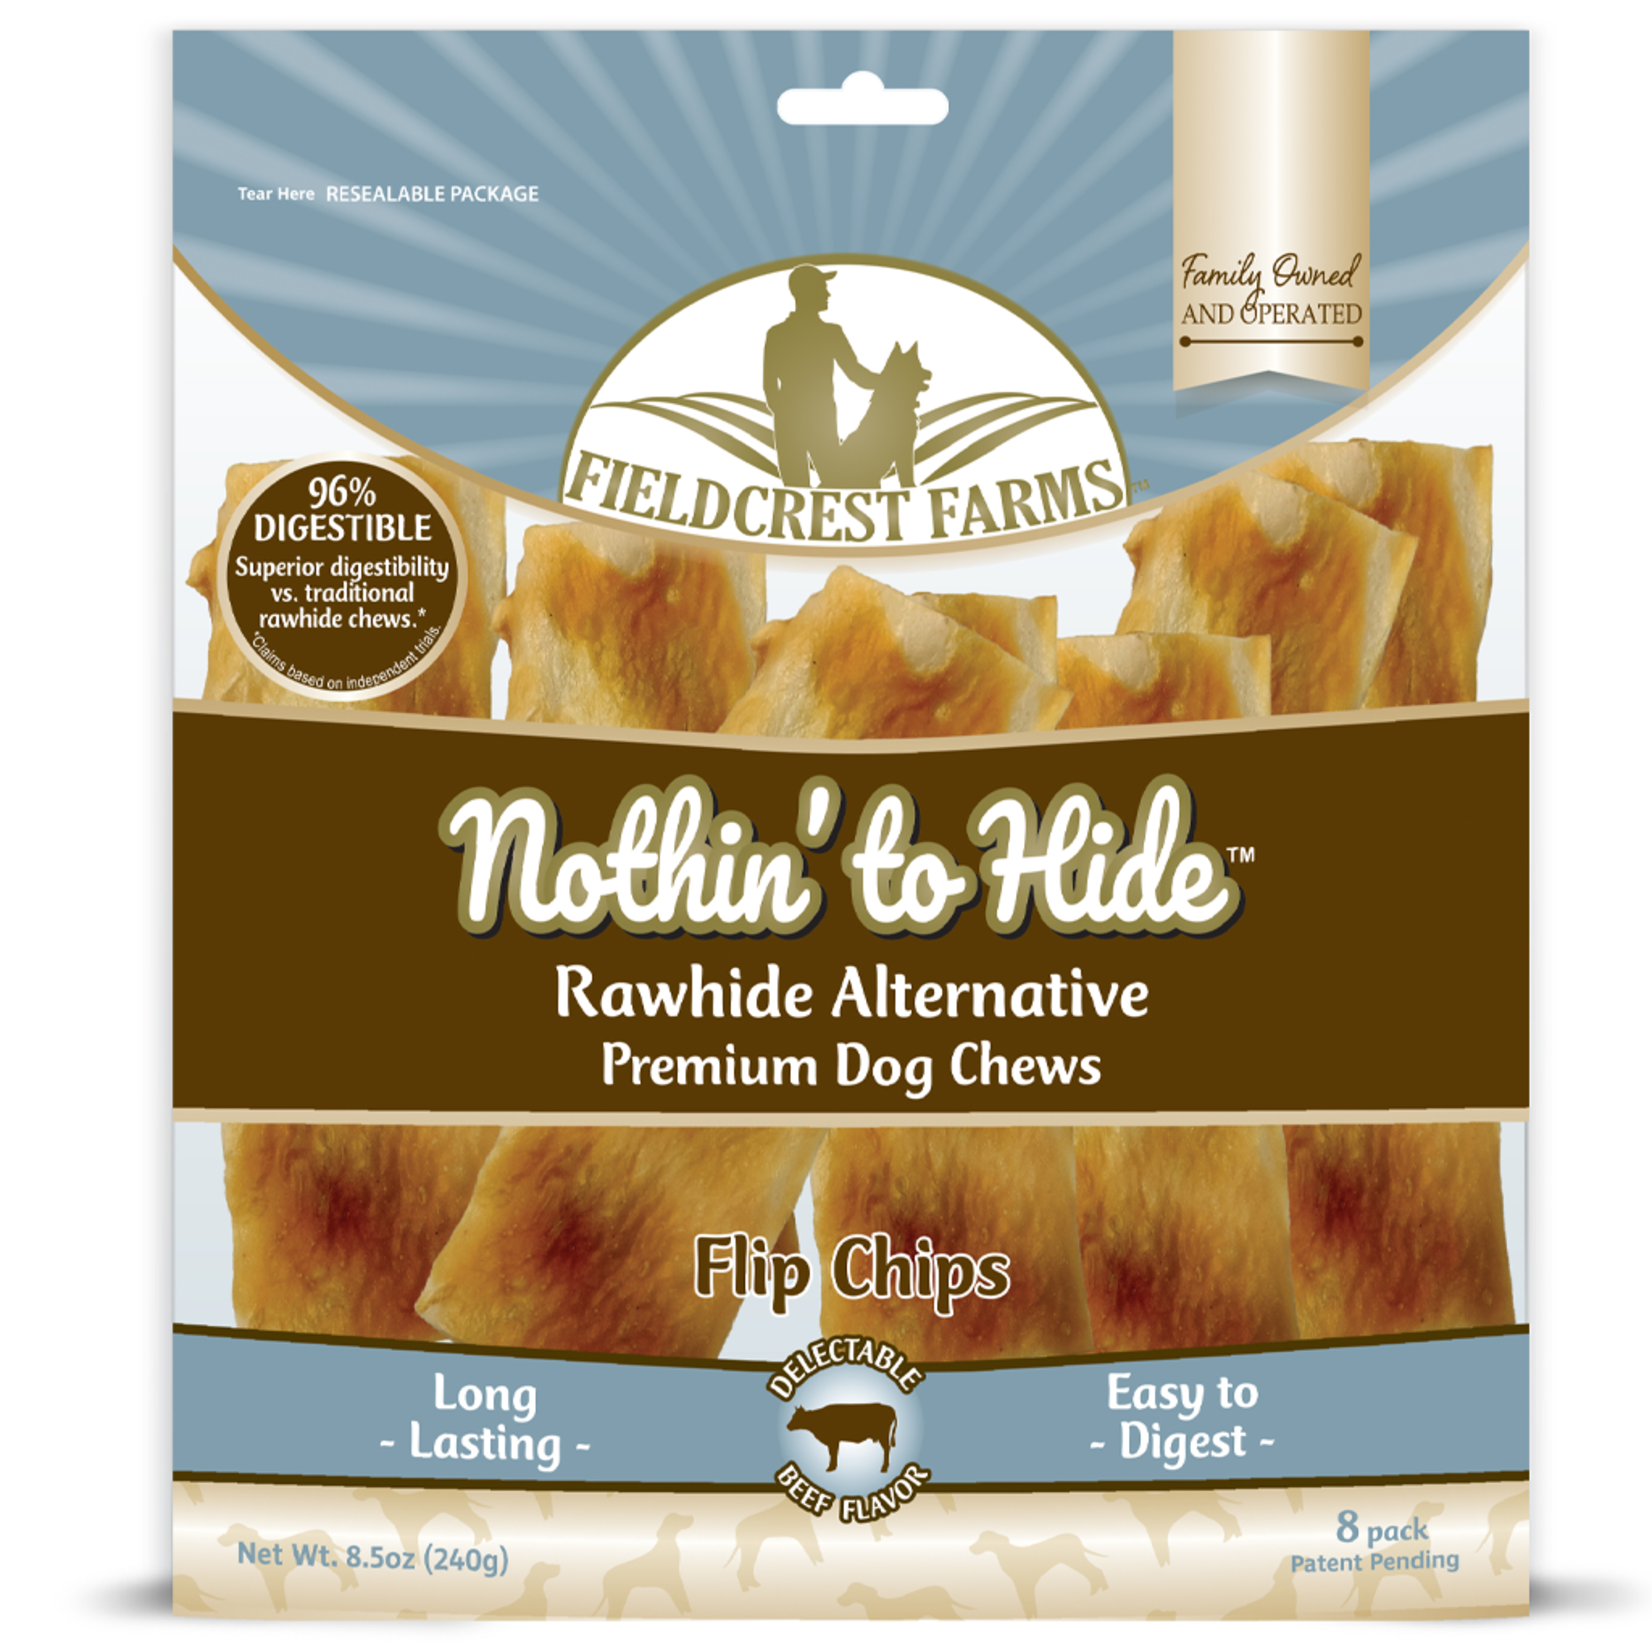 NOTHIN TO HIDE NOTHING TO HIDE Flip Chips Beef 8PK